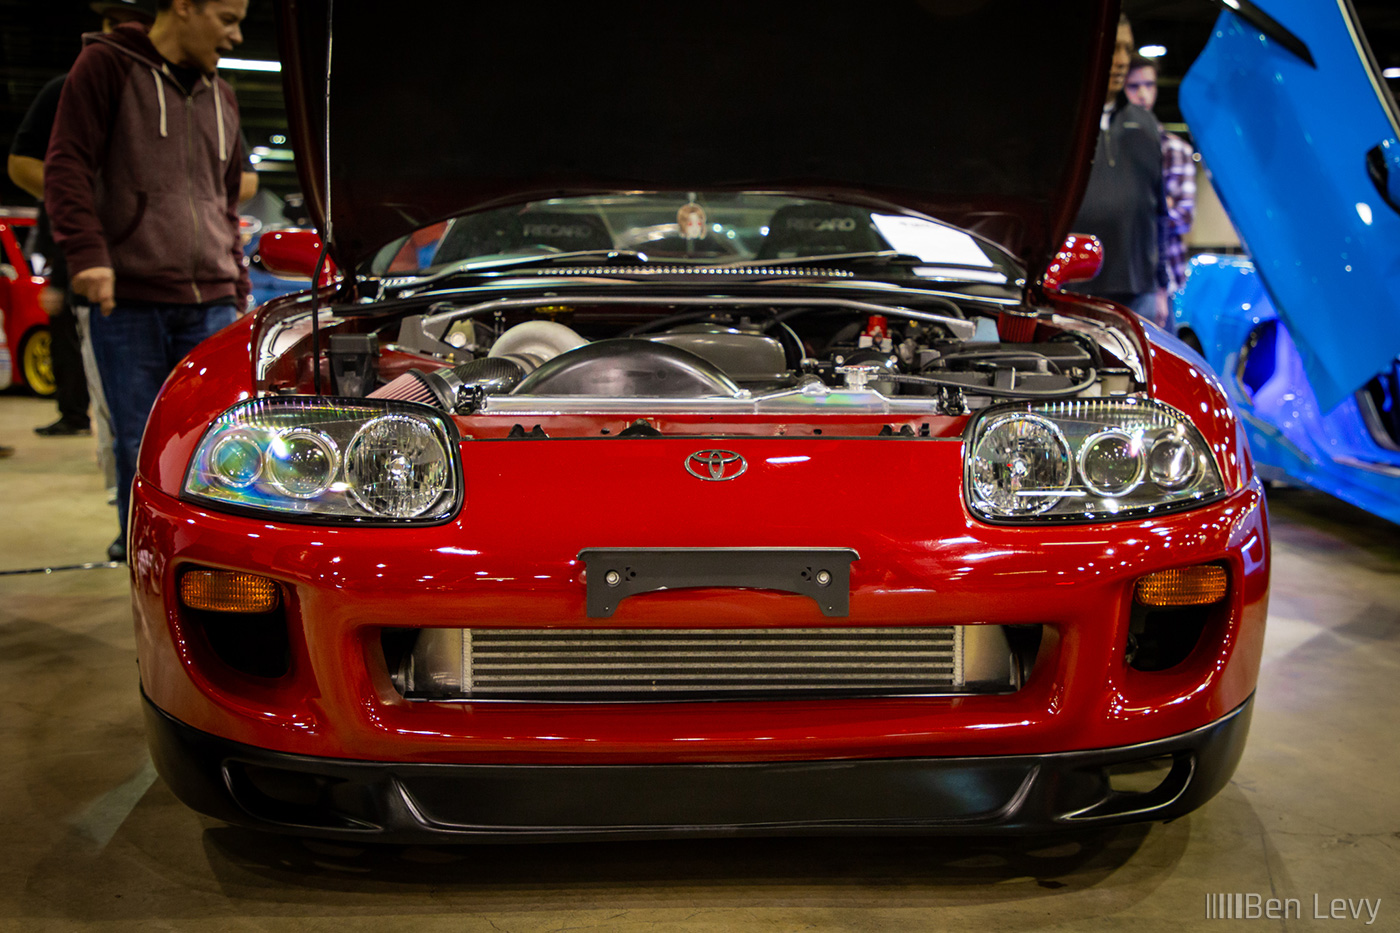 Front of RHD Toyota Supra from Oxide Auto